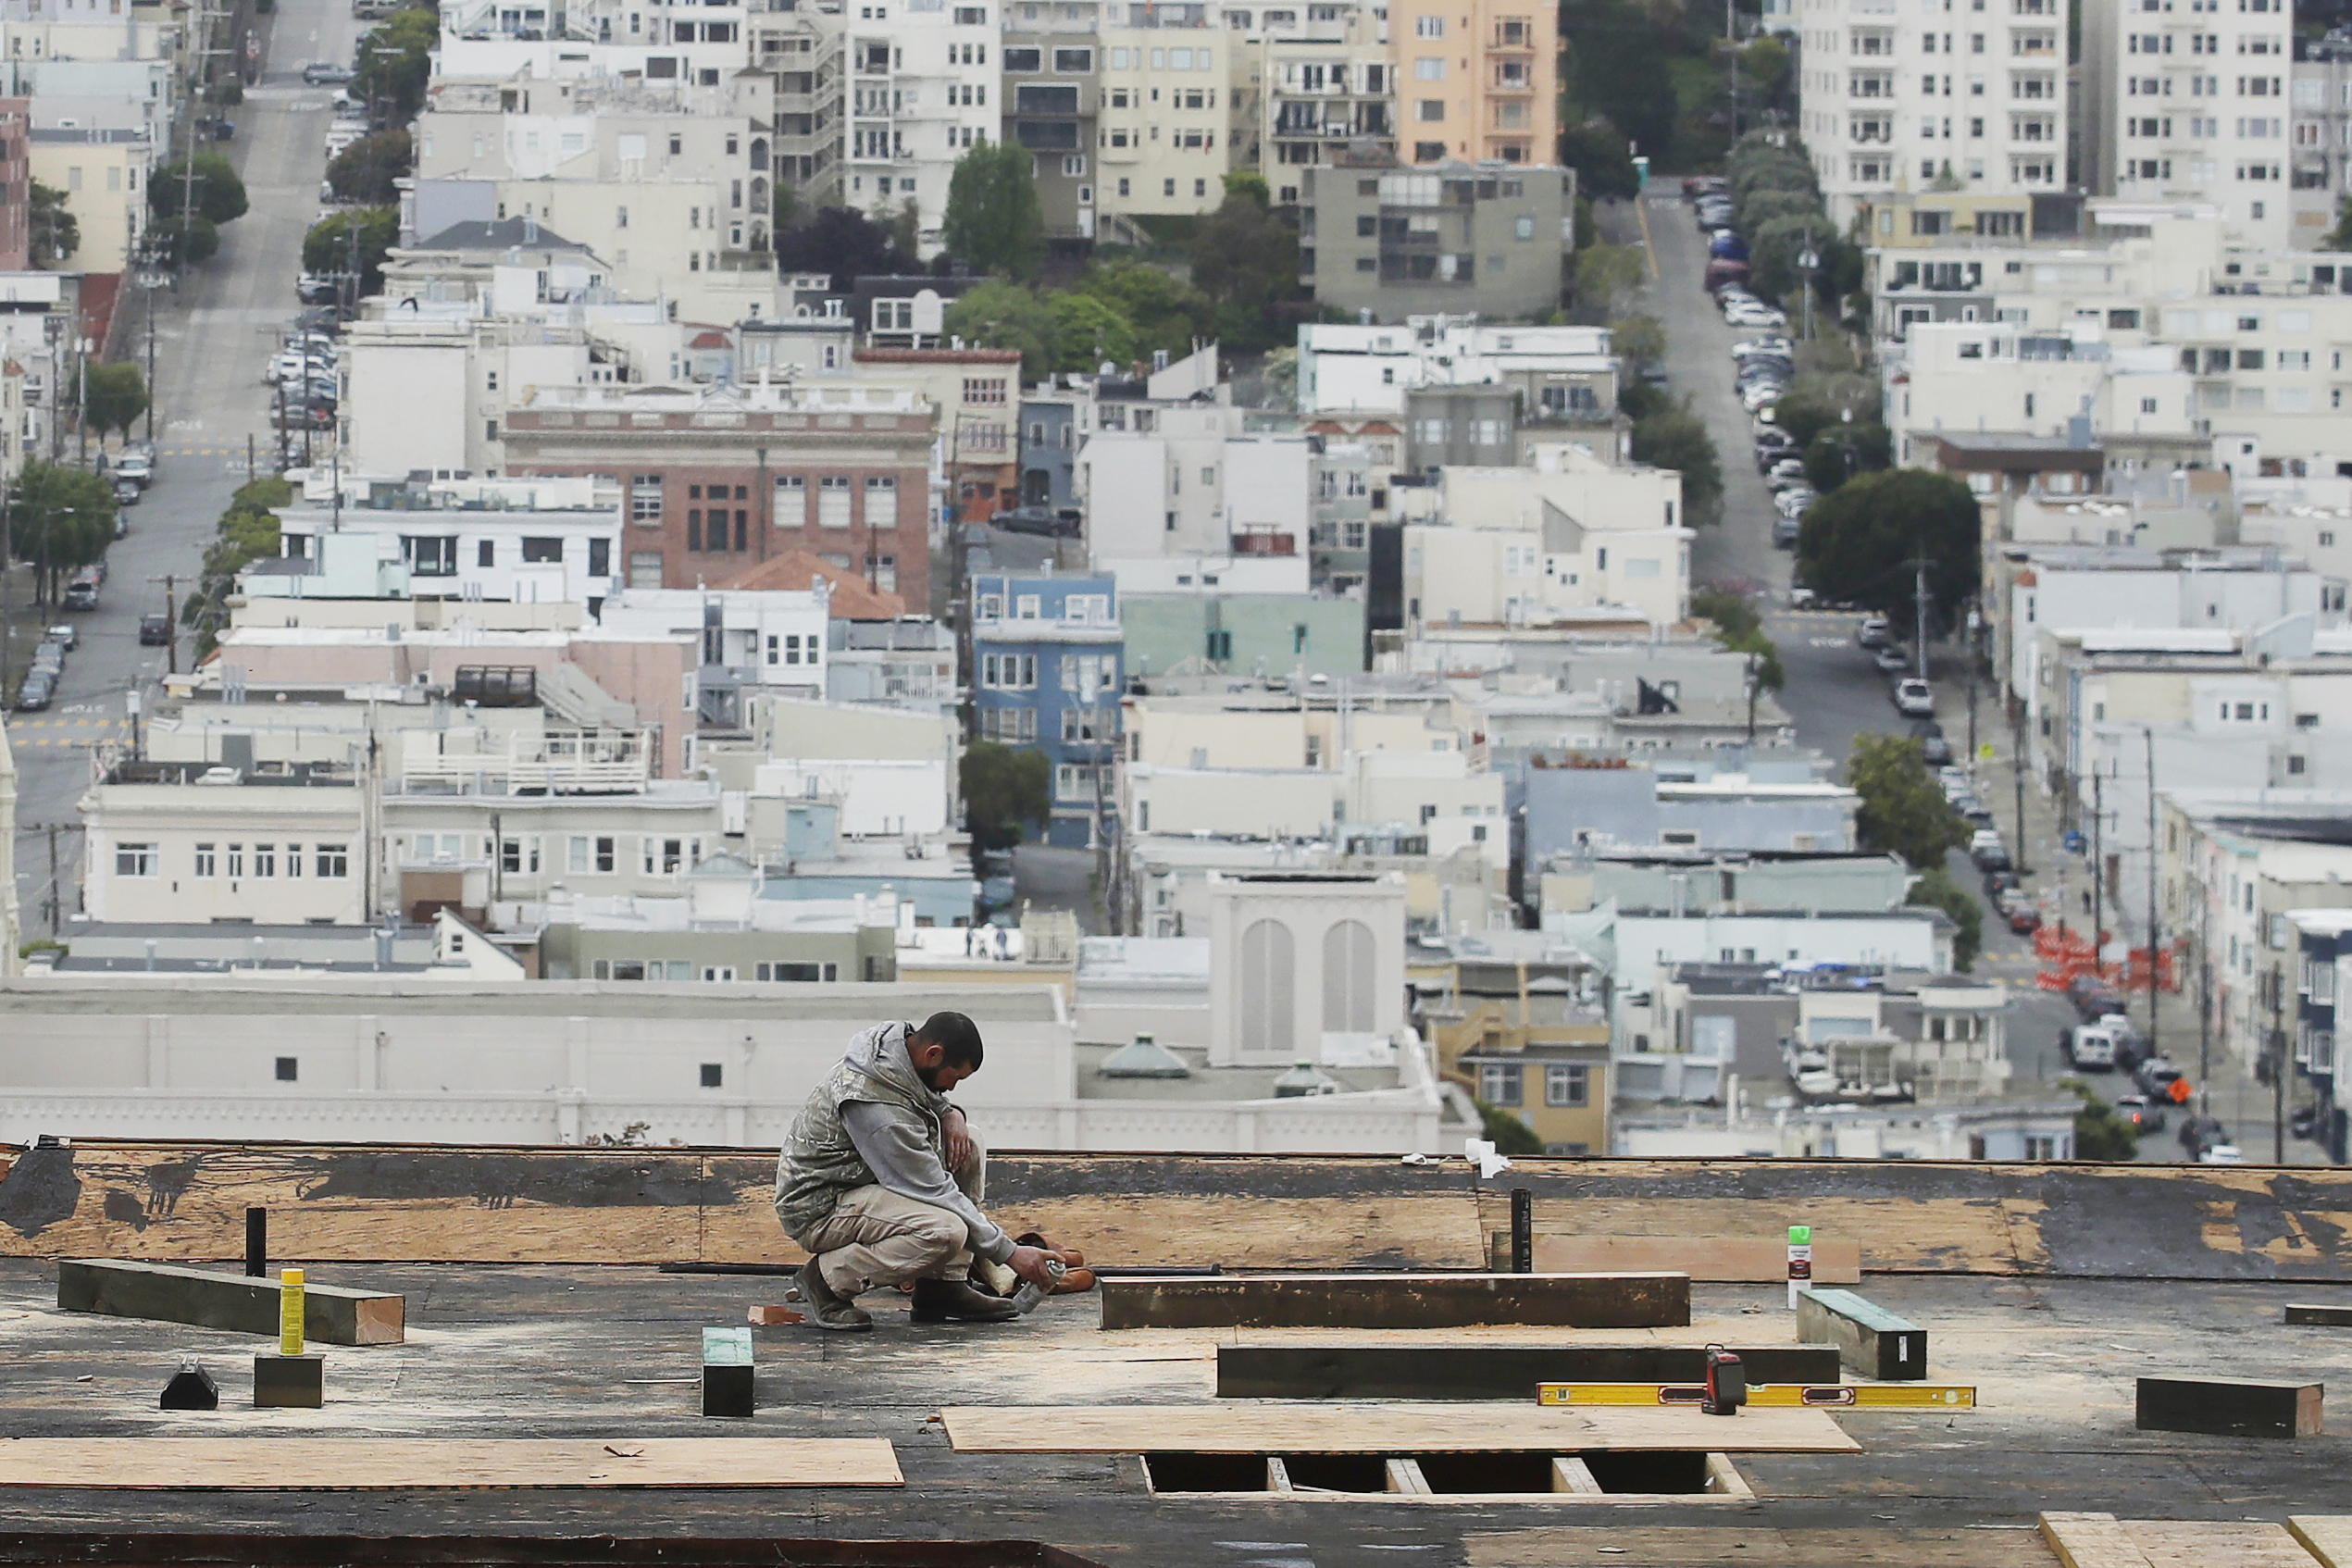 A worker crouches on a roof with a backdrop of a hilly urban street lined with buildings.